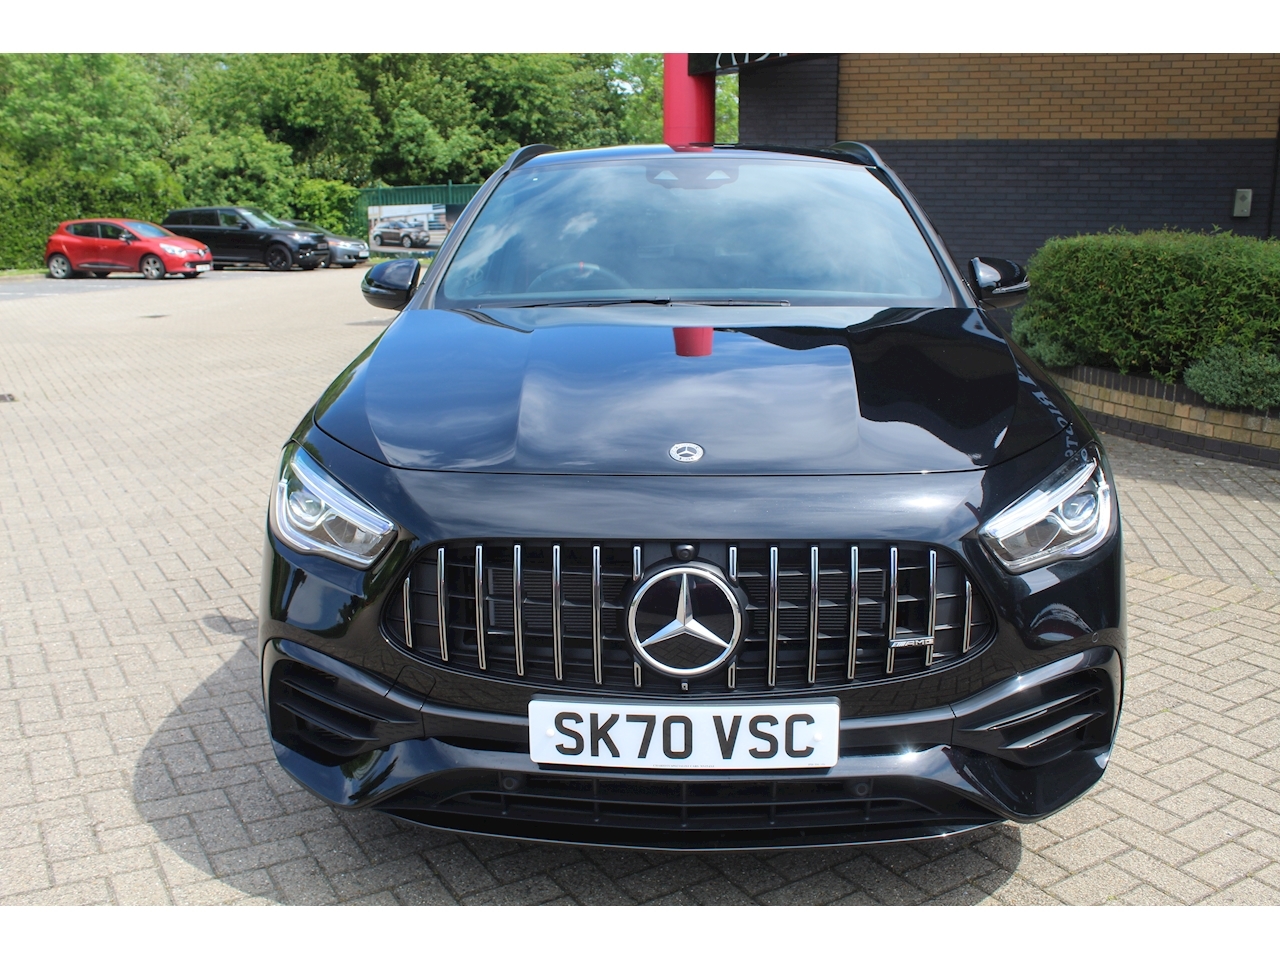 2.0 GLA45 AMG S SUV 5dr Petrol 8G-DCT 4MATIC+ (s/s) (421 ps)